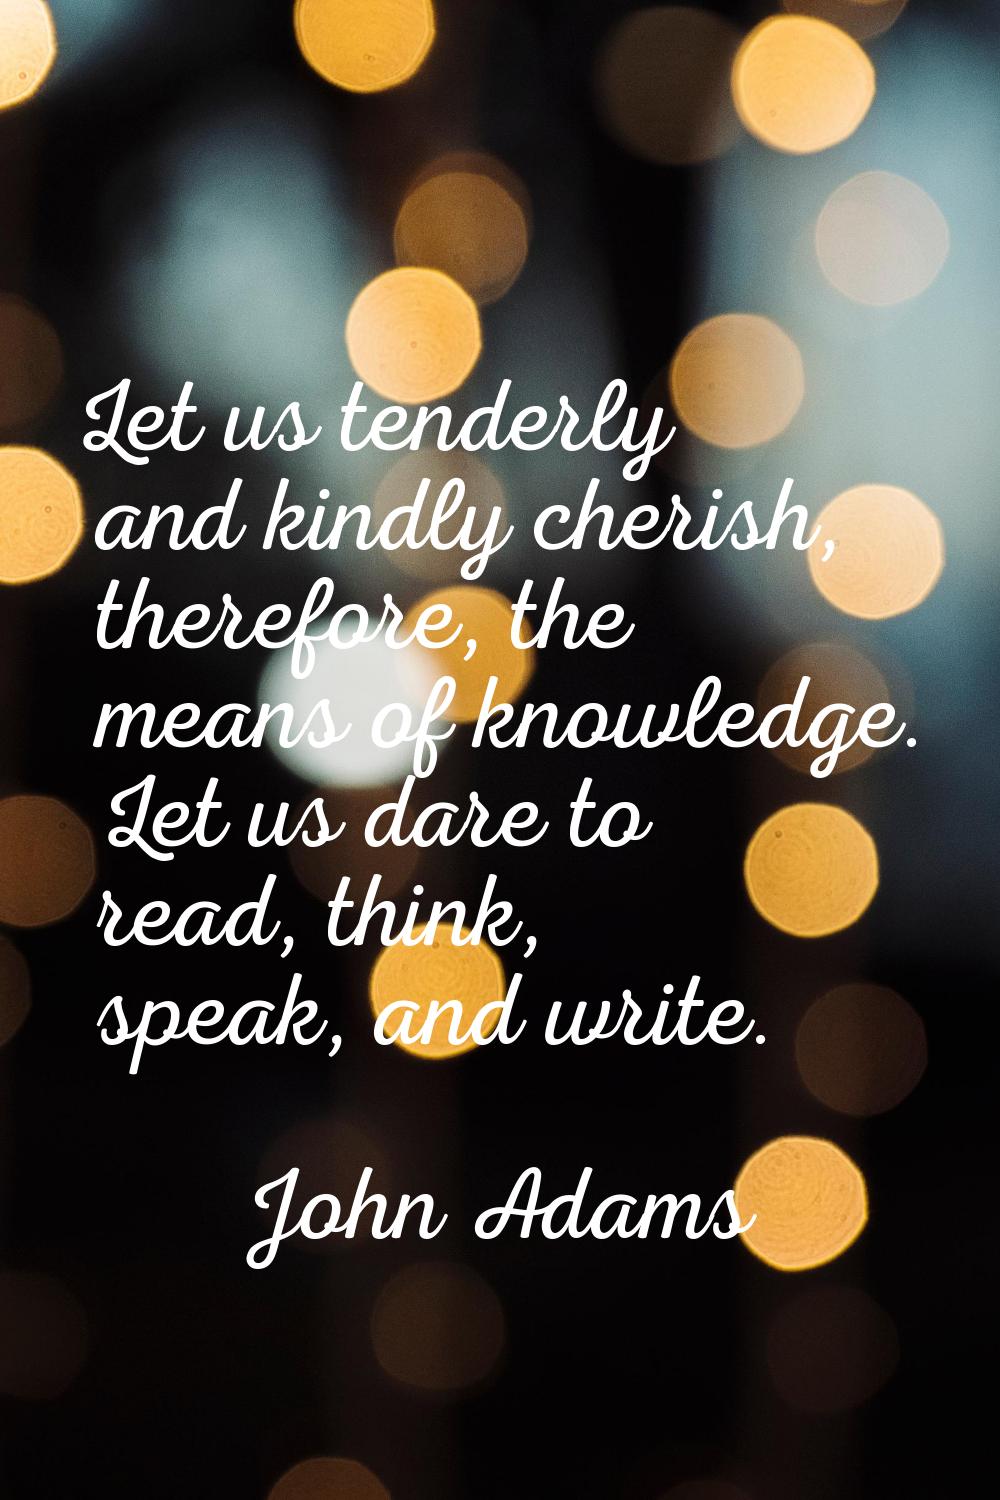 Let us tenderly and kindly cherish, therefore, the means of knowledge. Let us dare to read, think, 